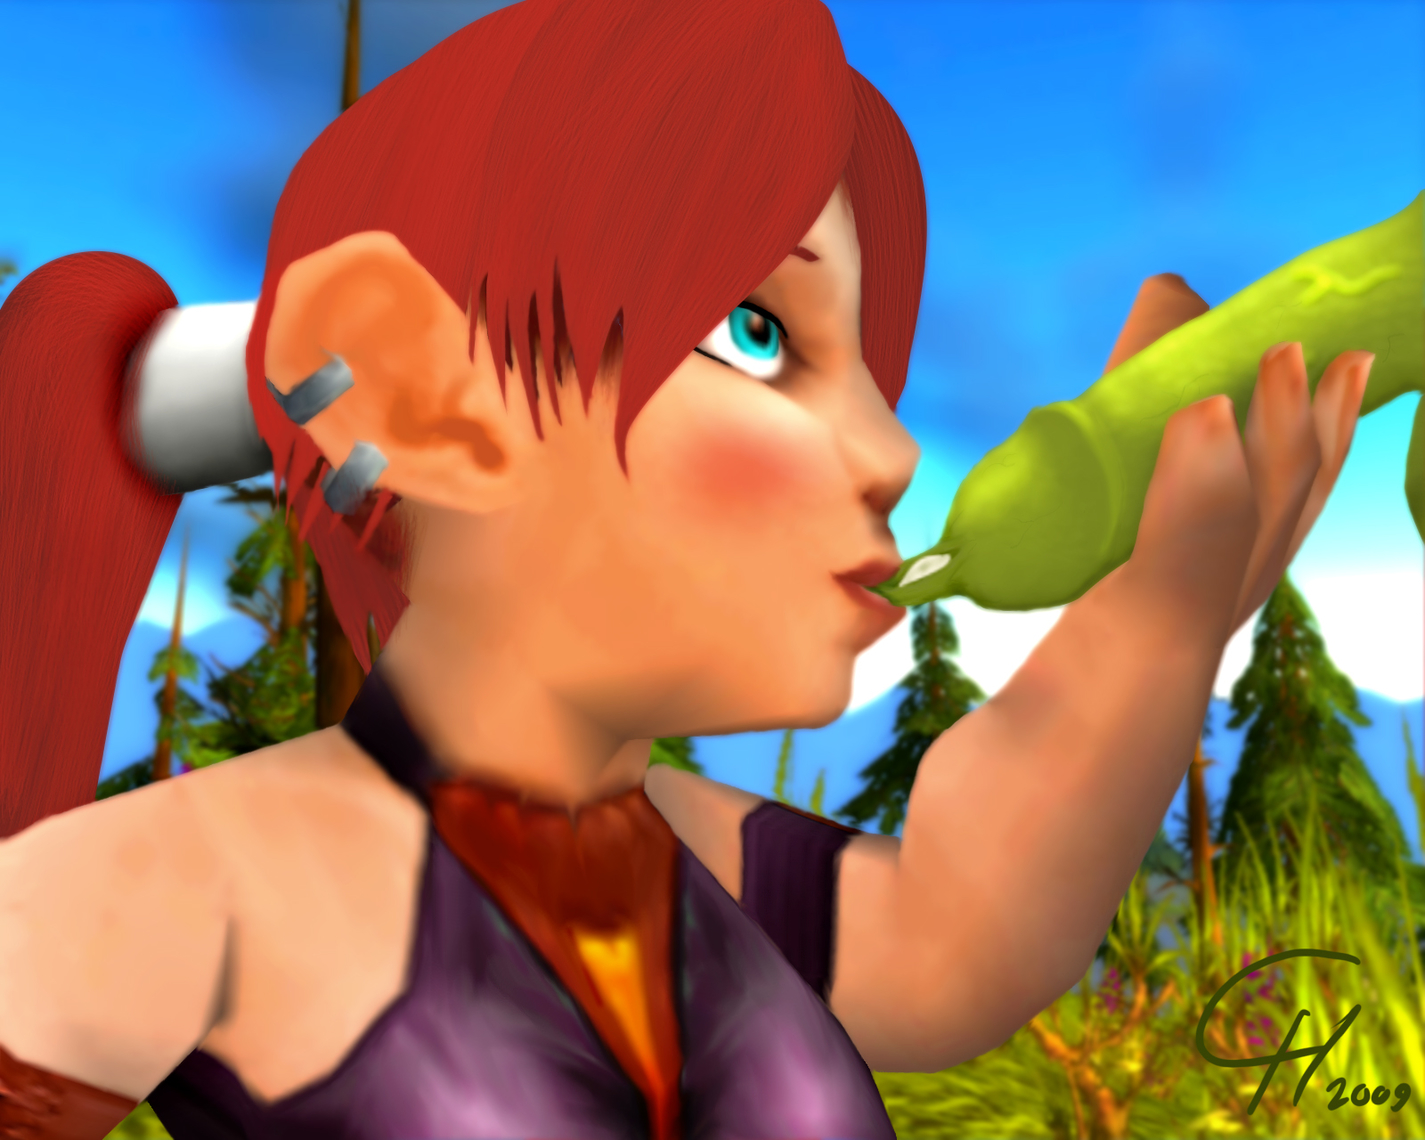 Green Candy [Gnome/Orc/Oral]
Some hammers might be slightly too "small" for strong Brixi to handle with,
but she have learned few trick how to get around with them using her tinkering gadgets and her mind.
Sometimes a creative use of body and mind is at the place when a tasty "candy hammer" is brought before her.
Keywords: Gnome;OC;Orc;Oral;Size difference